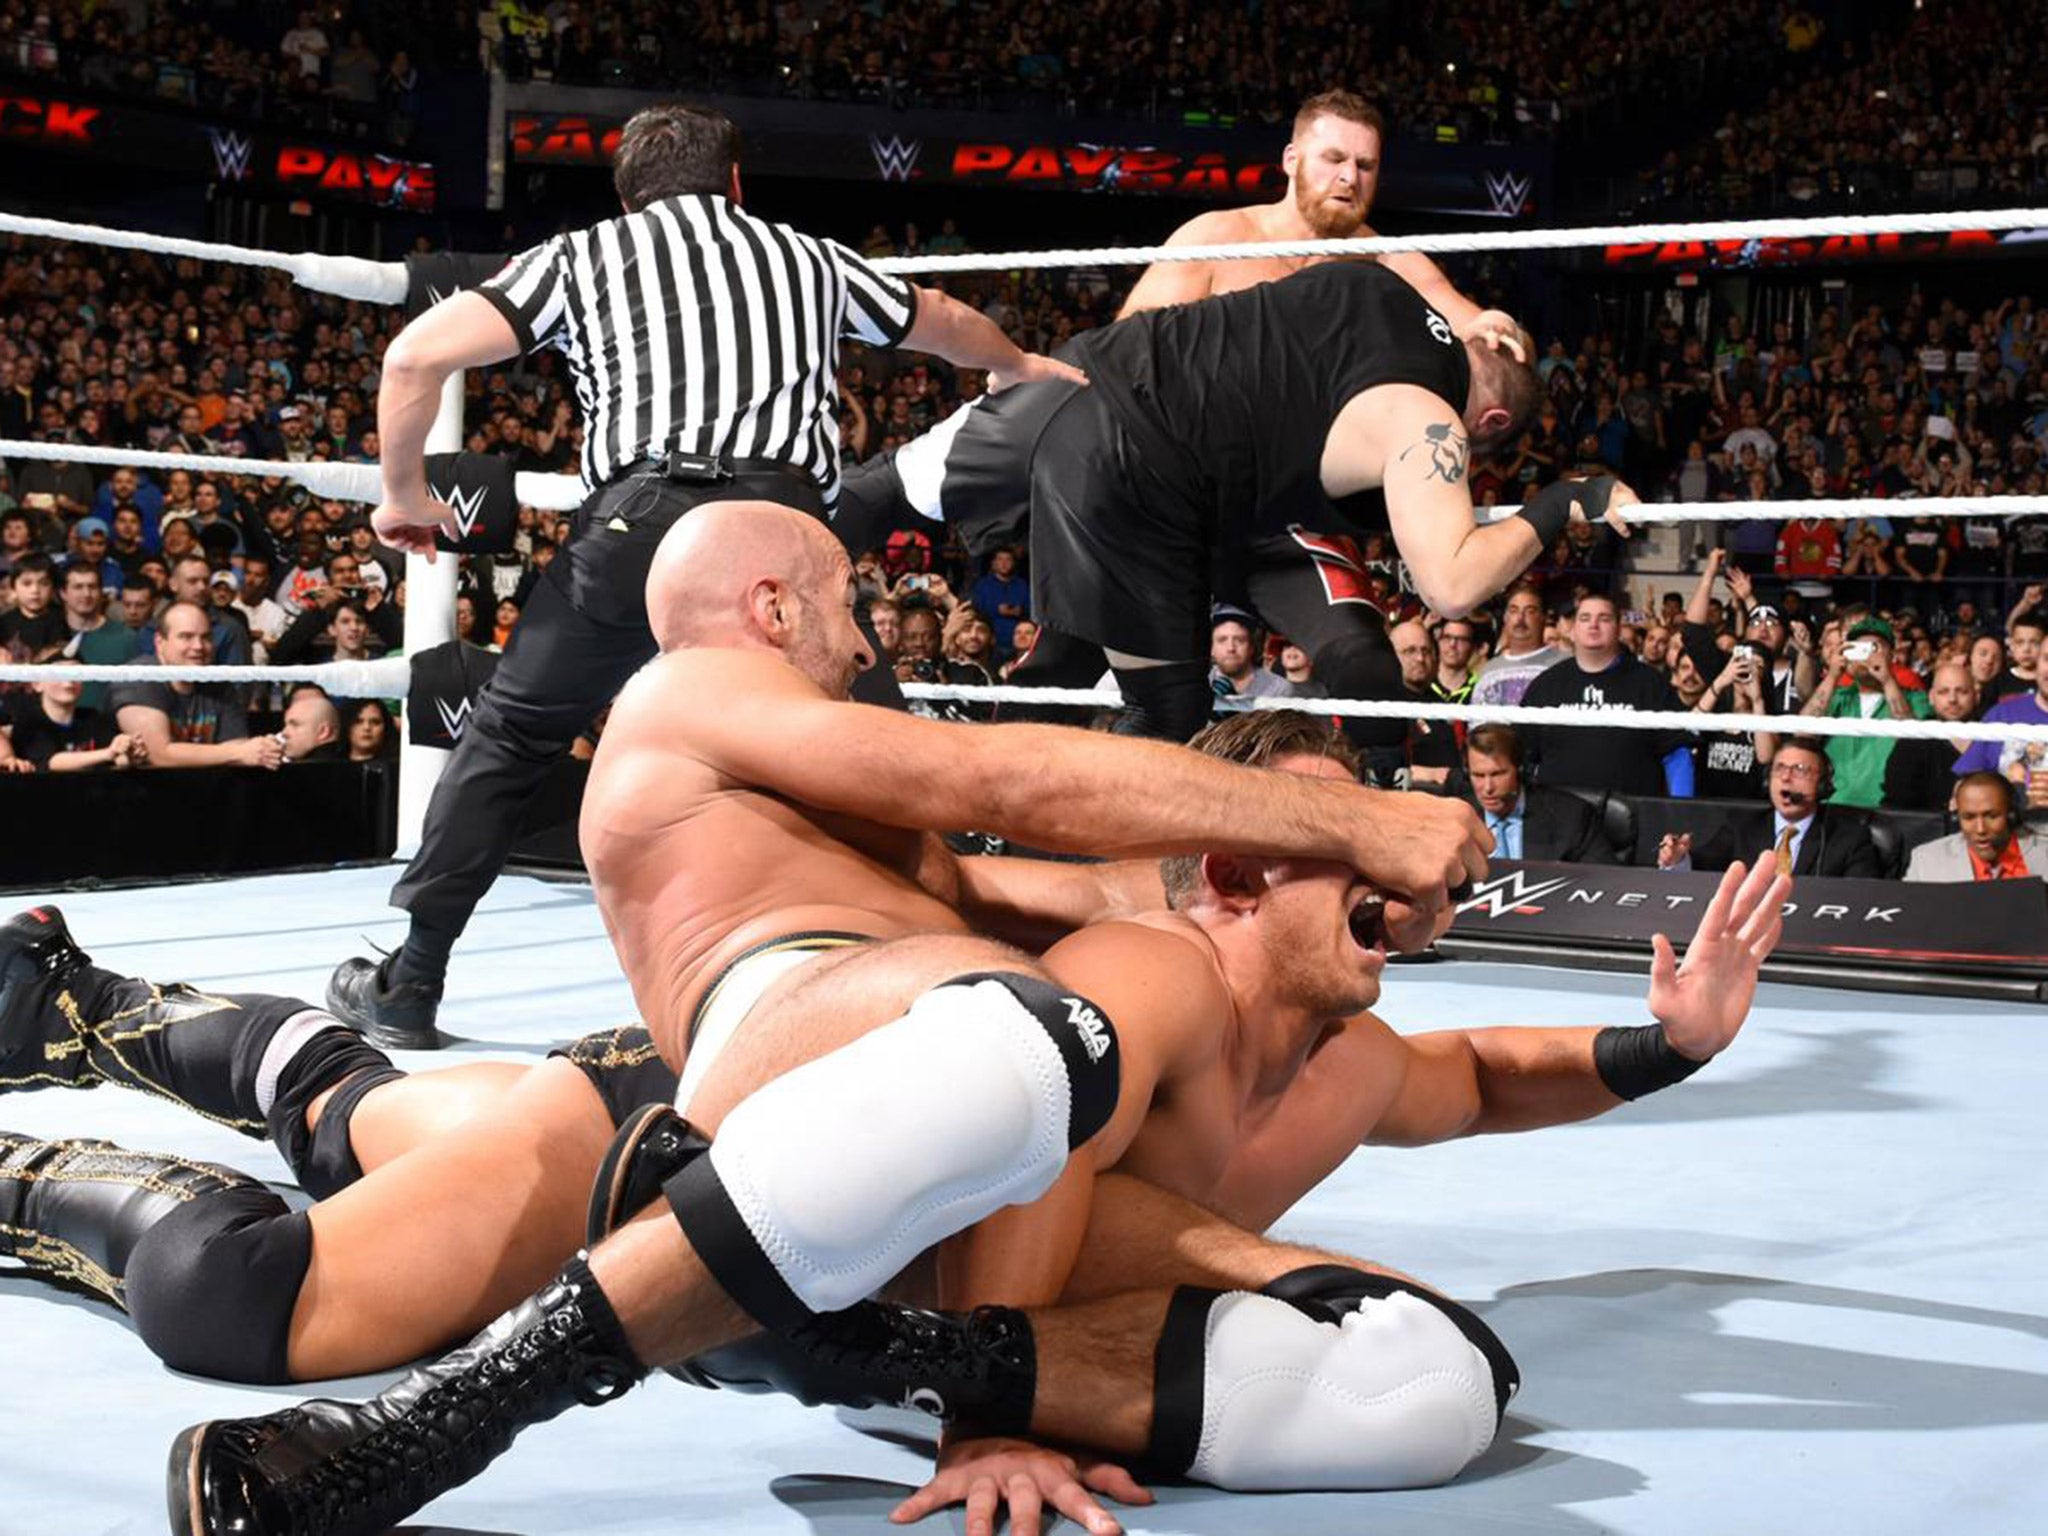 the Miz managed to hold on to his title against Cesaro